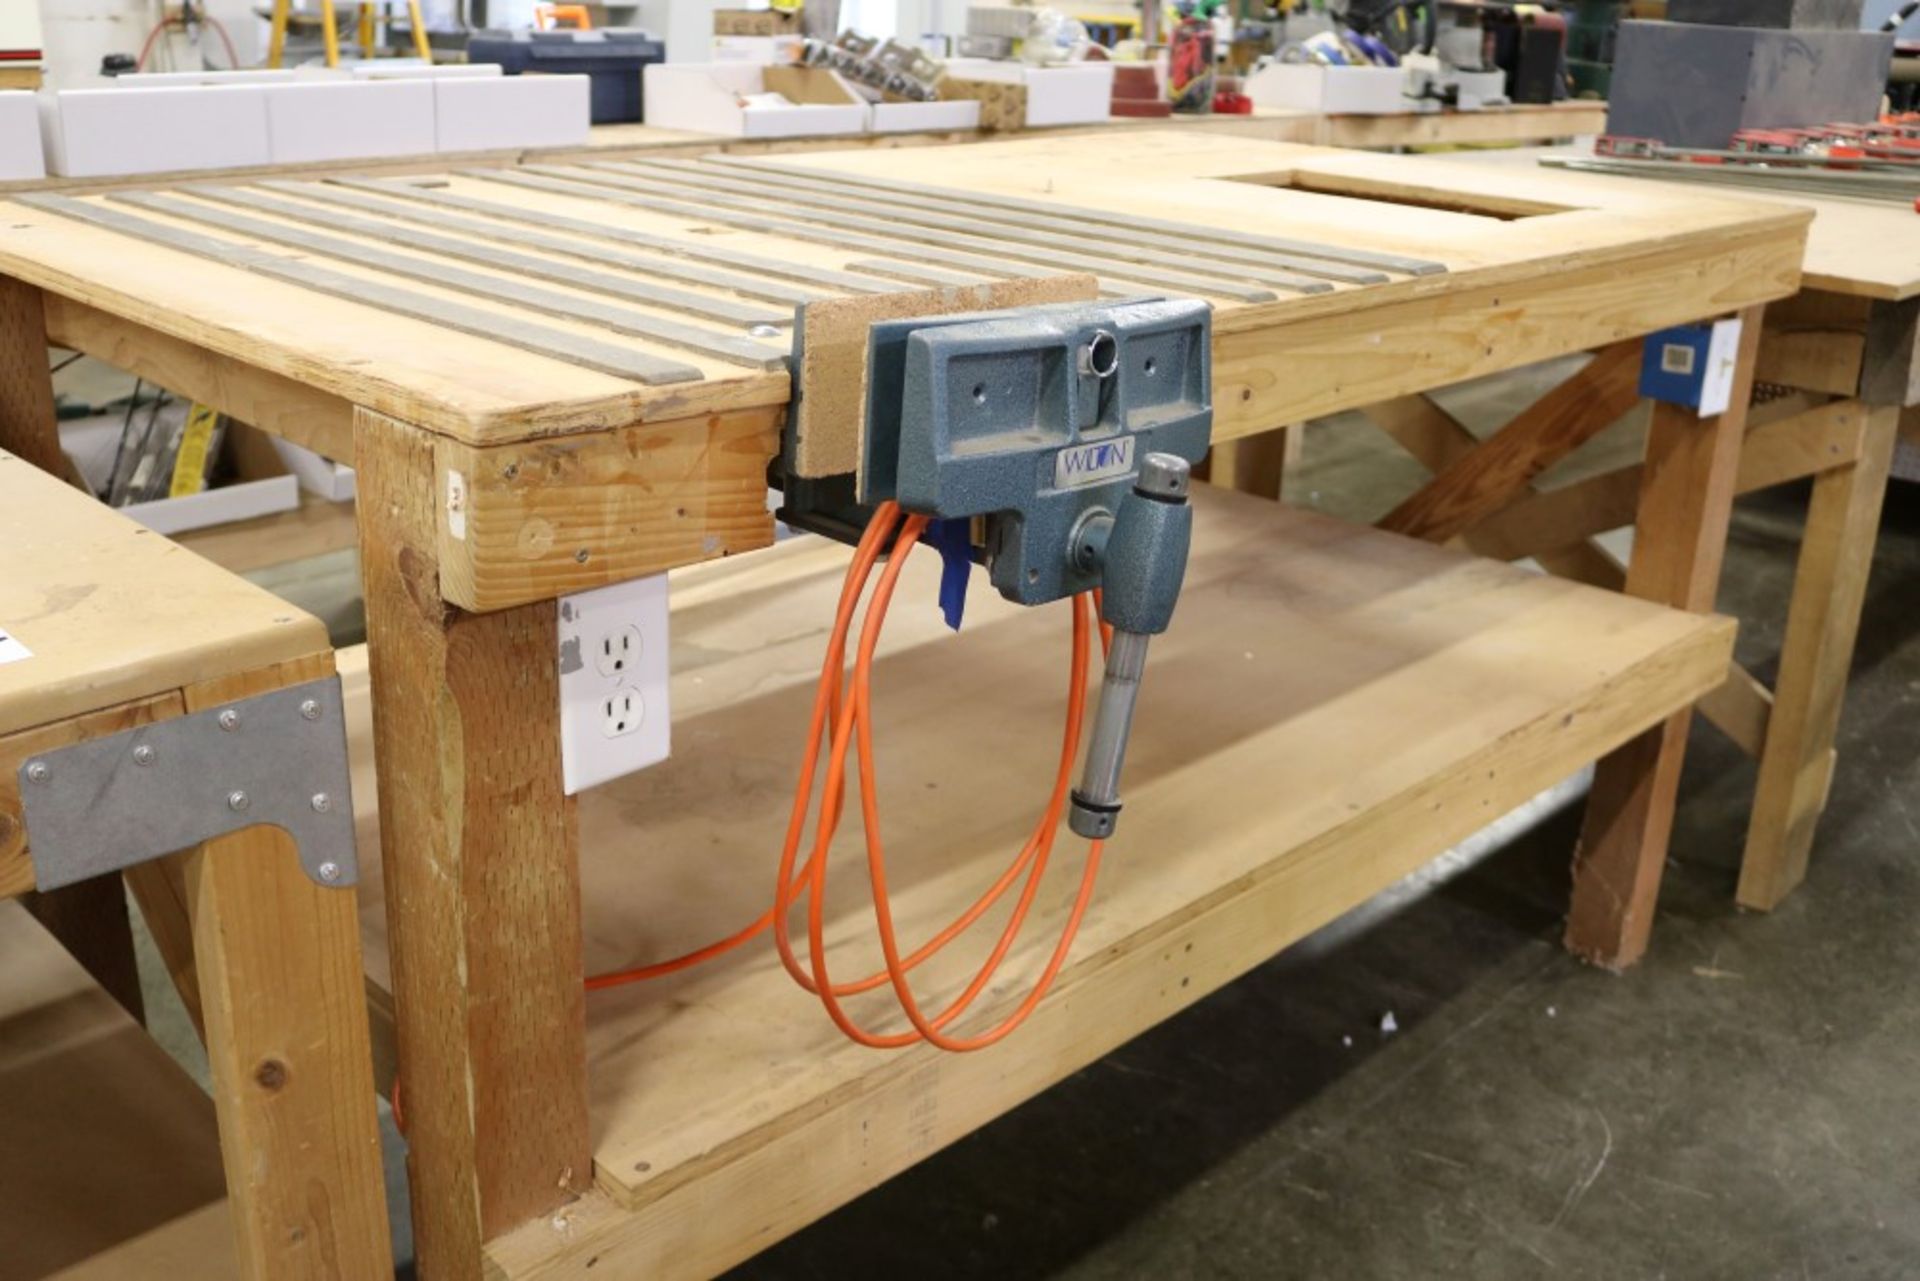 2 Tier Heavy Duty Wood Work Station with Electrical Outlets and Wilton 10" Vise 72" x 39" x 41" - Image 4 of 7